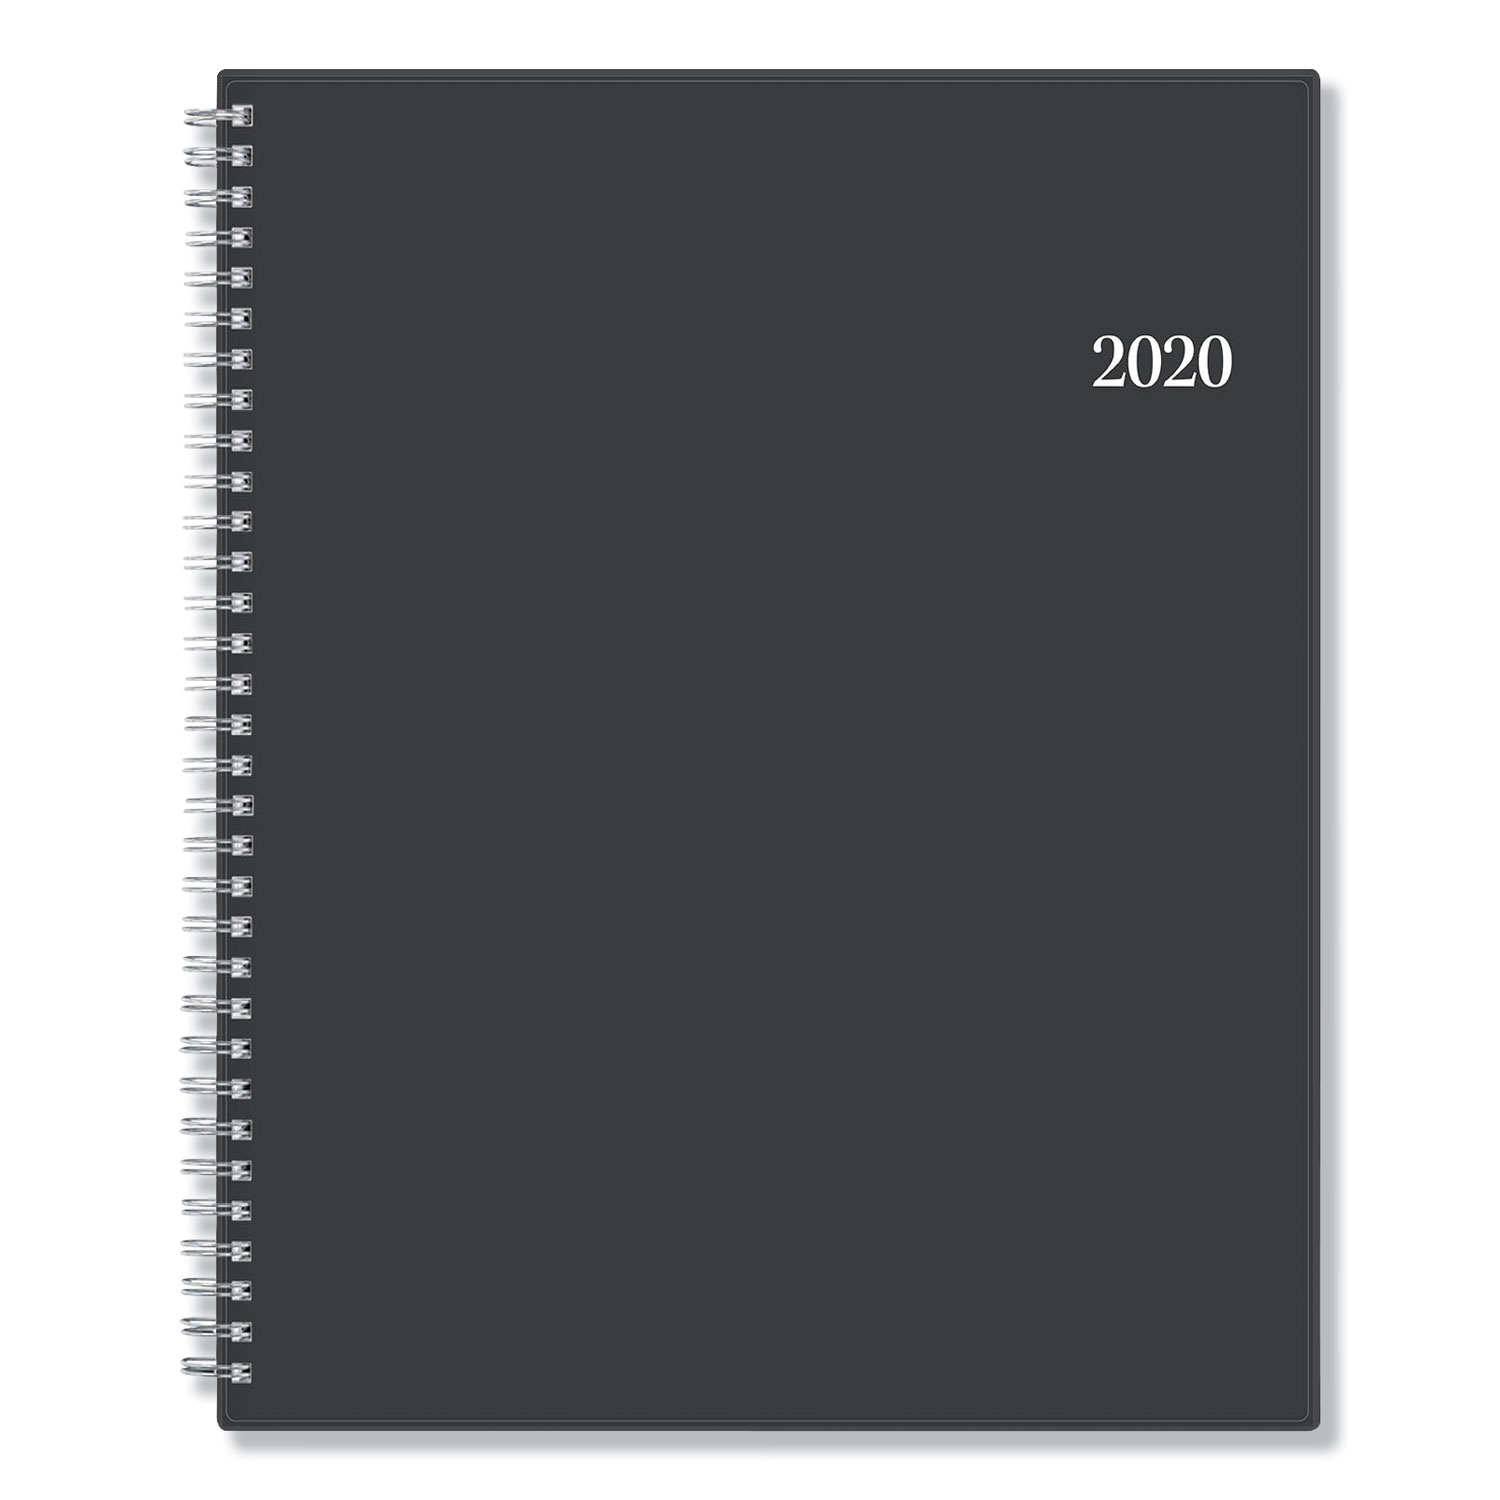 Passages Weekly/Monthly Wirebound Planner, Vertical Format, 11 x 8 1/2, Black Cover, 2020